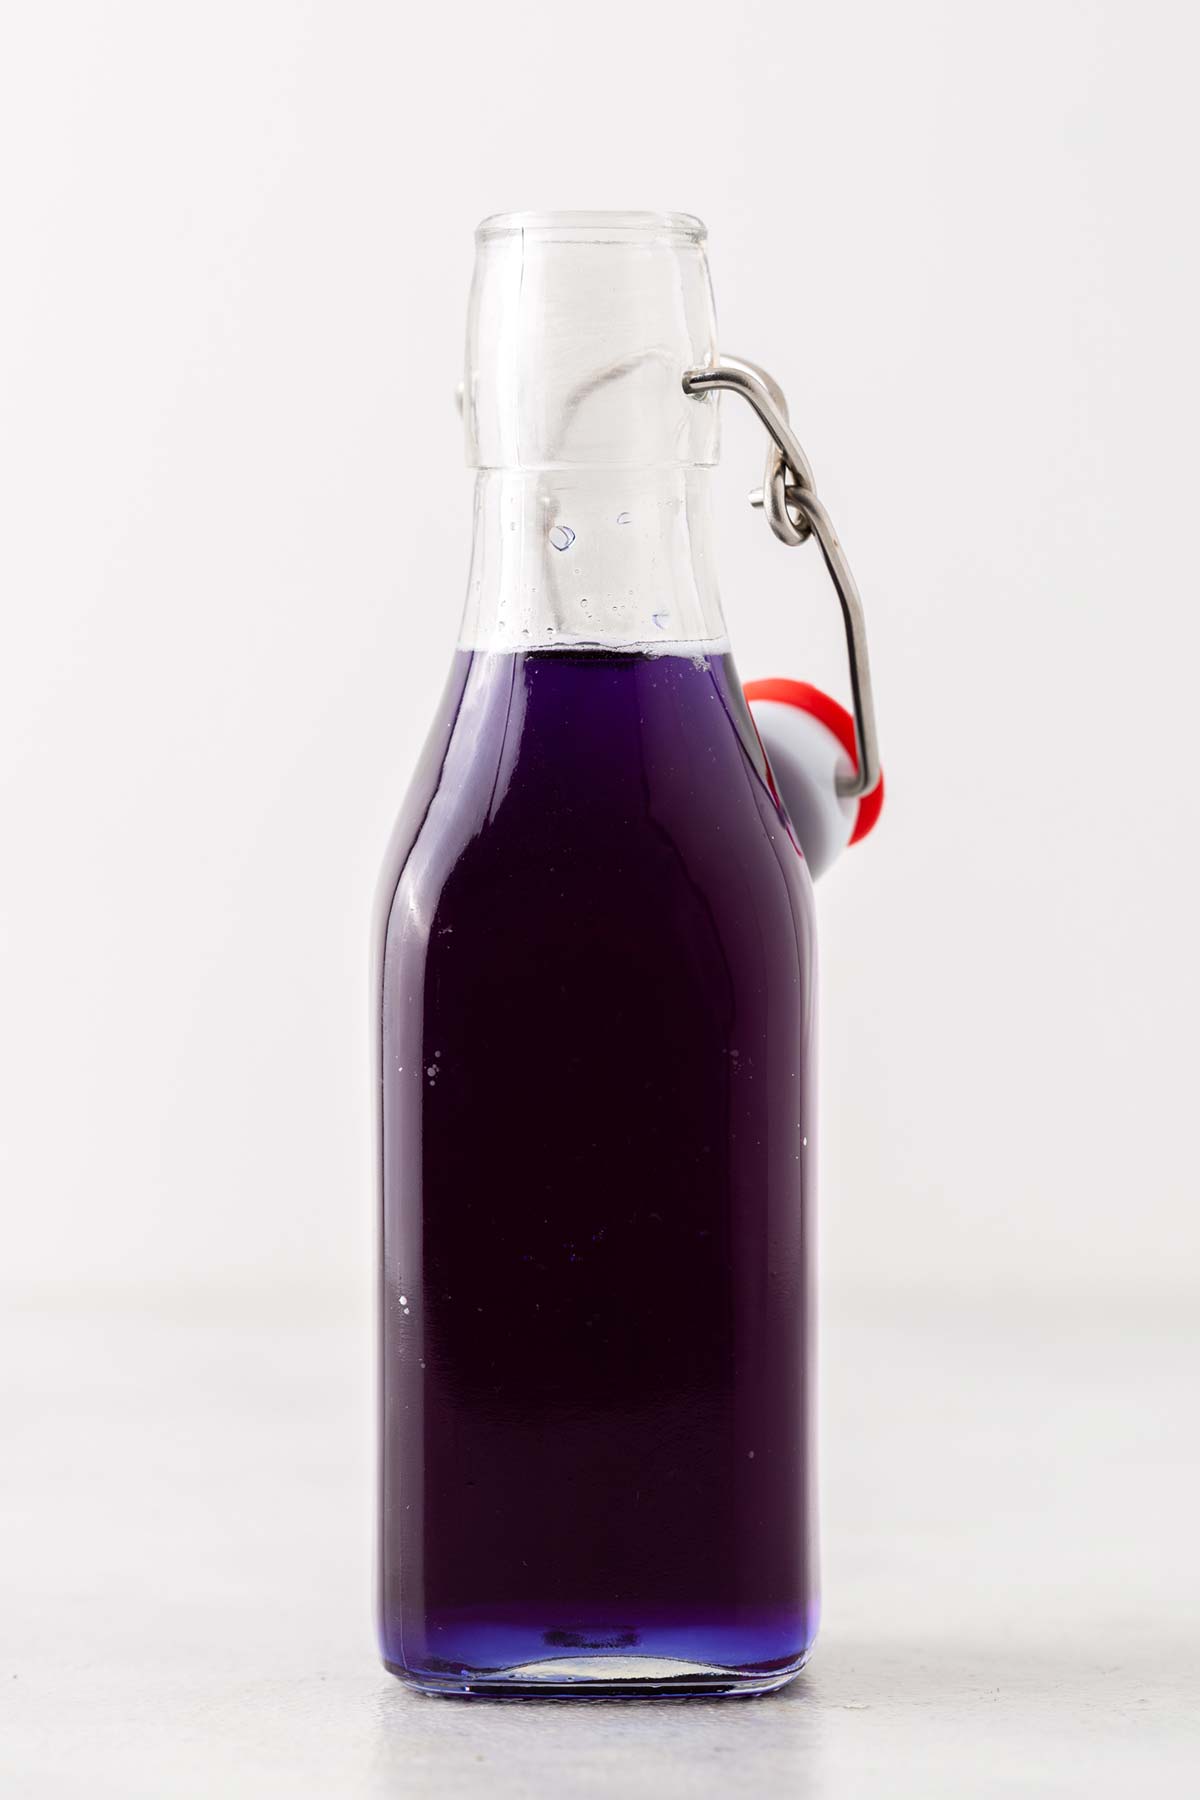 Butterfly Pea Flower Syrup in clear glass bottle.